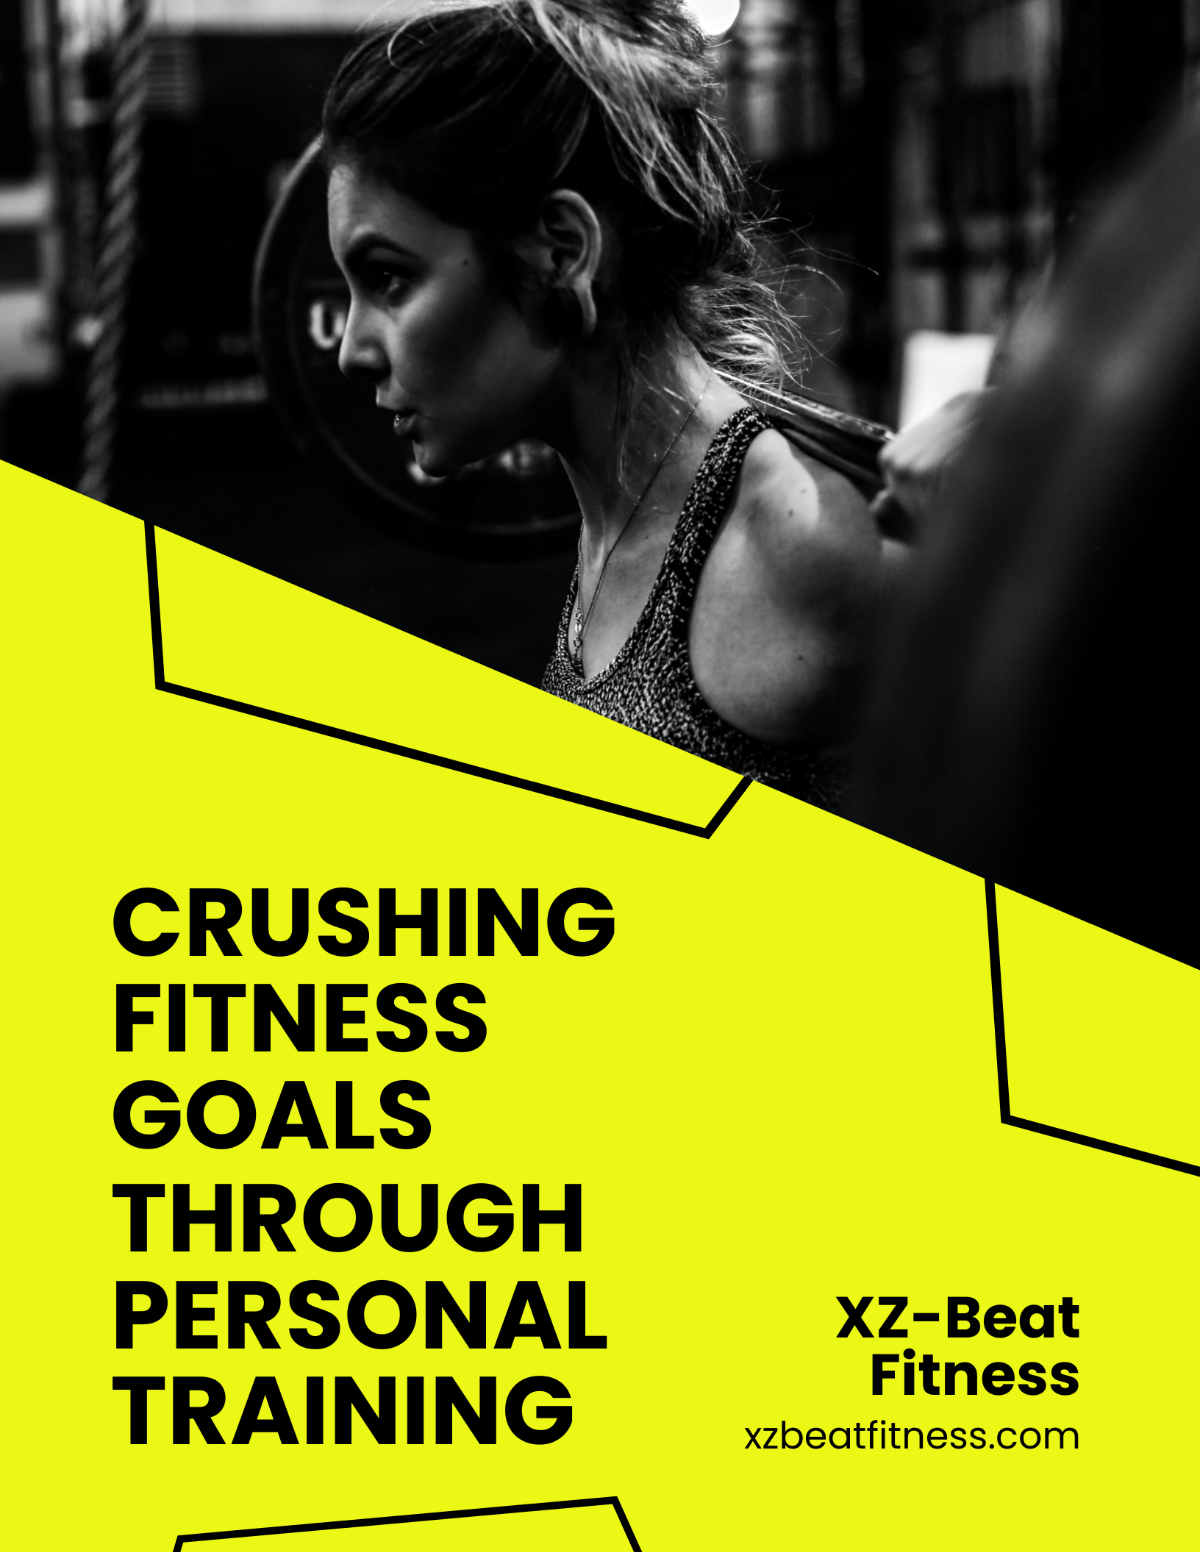 Personal Training Flyer Template